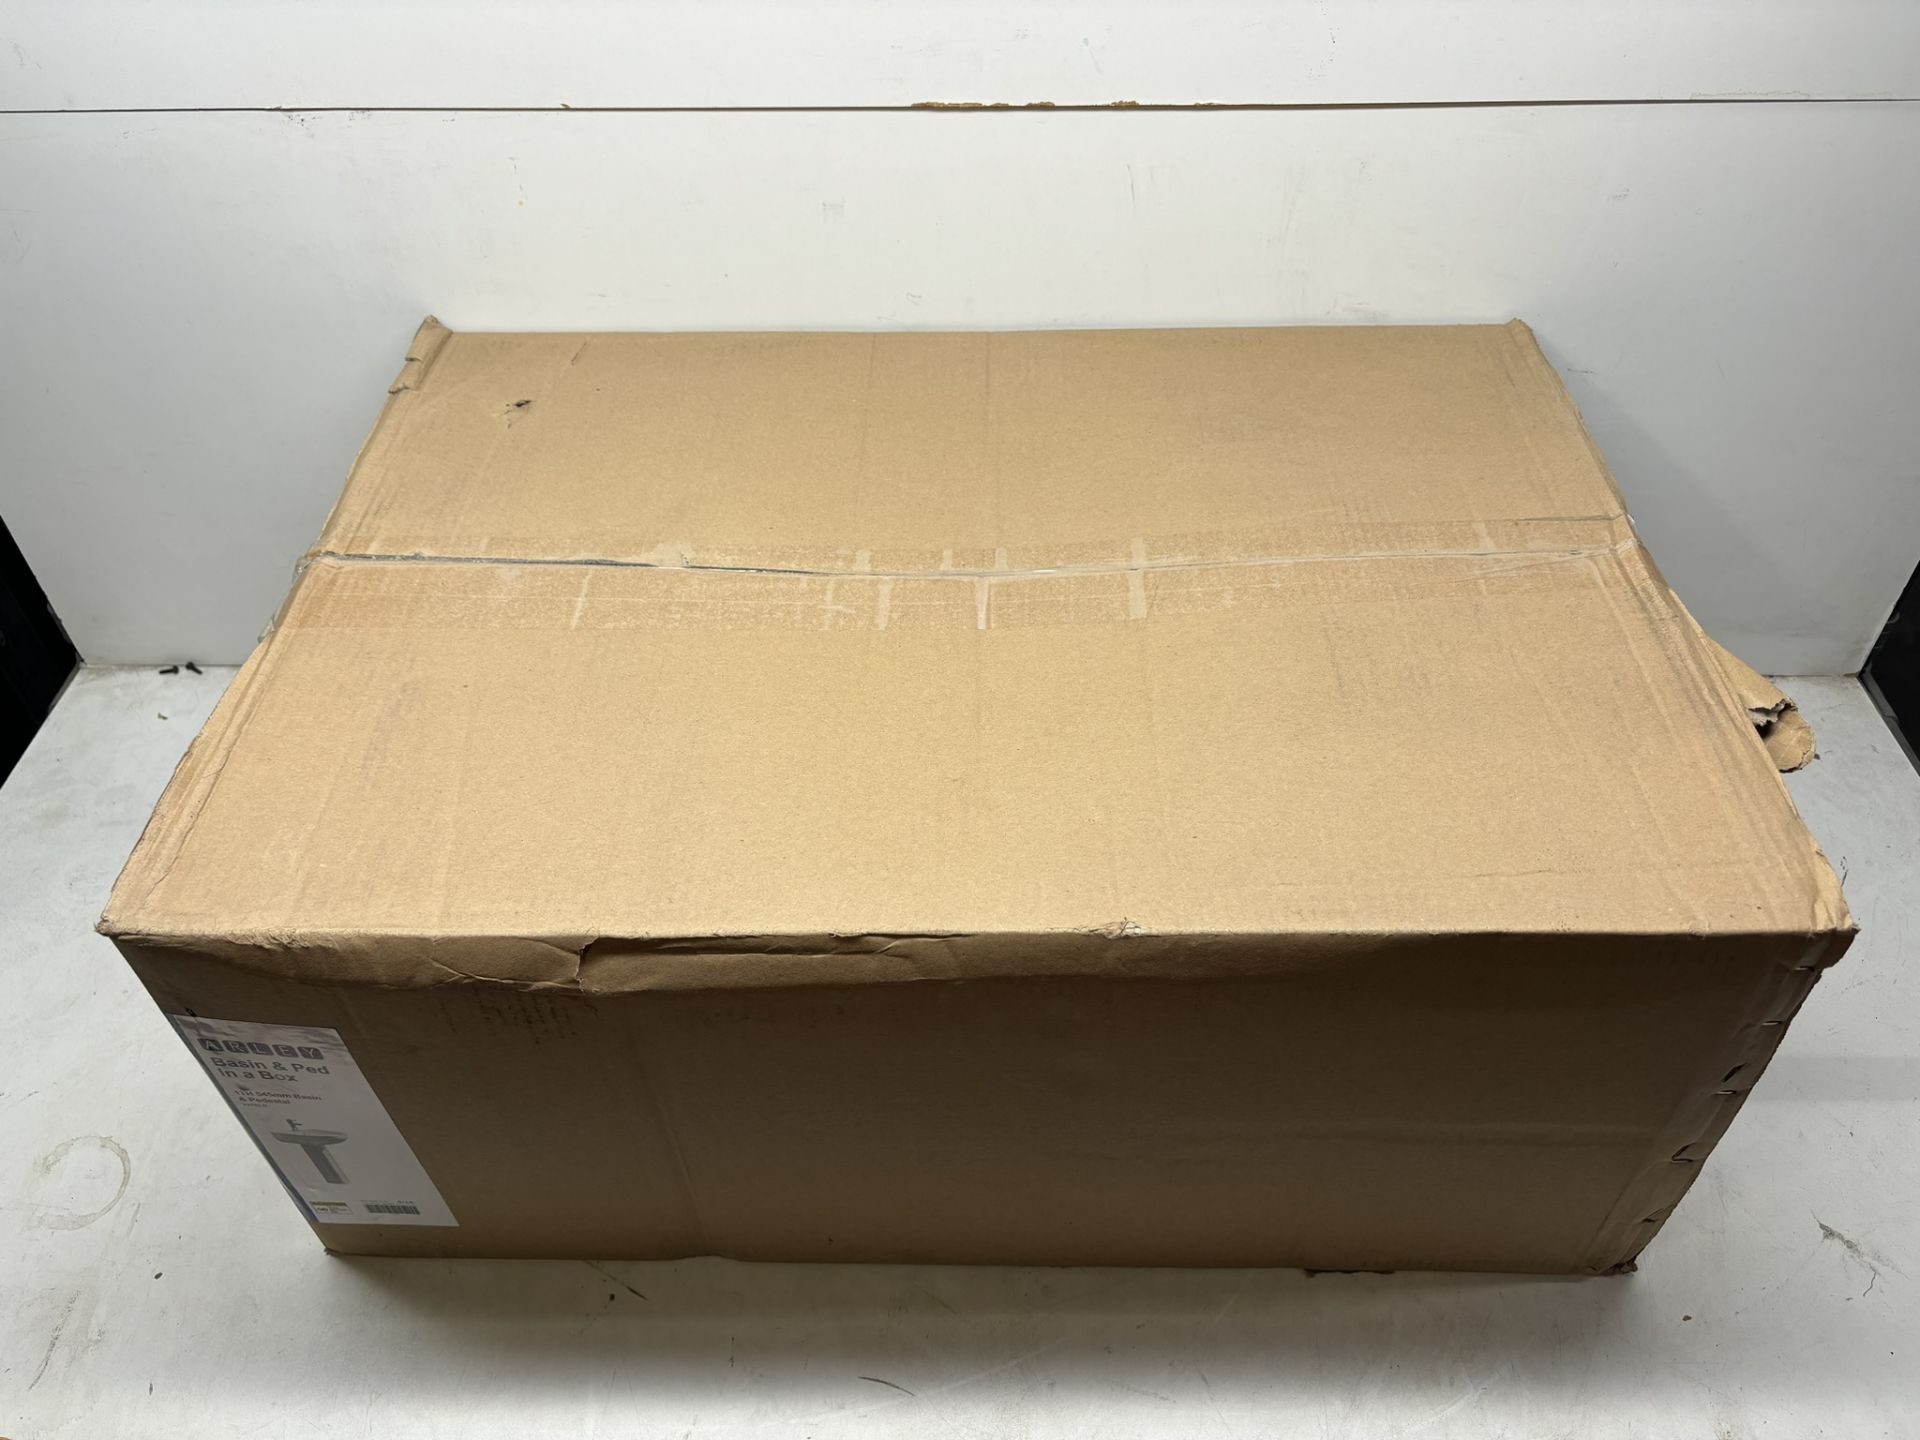 Arley 23702-D 1 Tap Hole 545mm Basin & Pedestal In A Box - Image 4 of 9